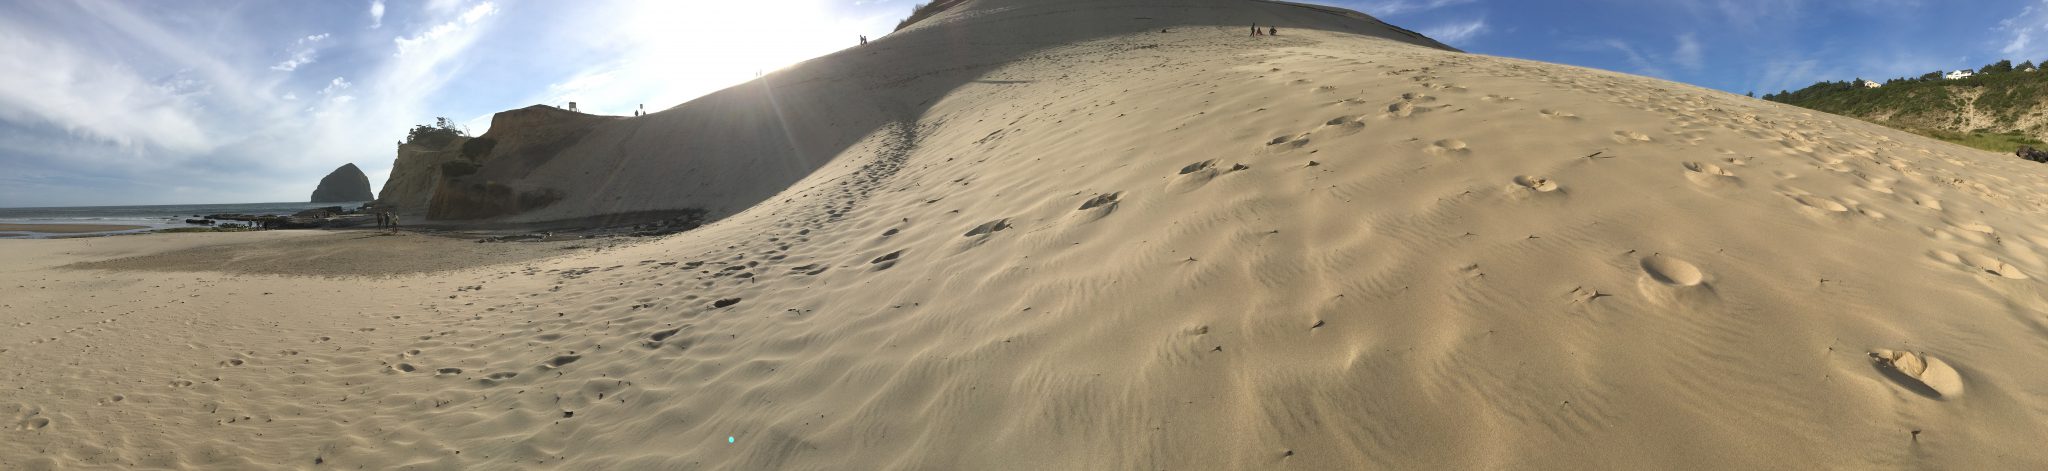 The bottom of the steep dune in Pacific City